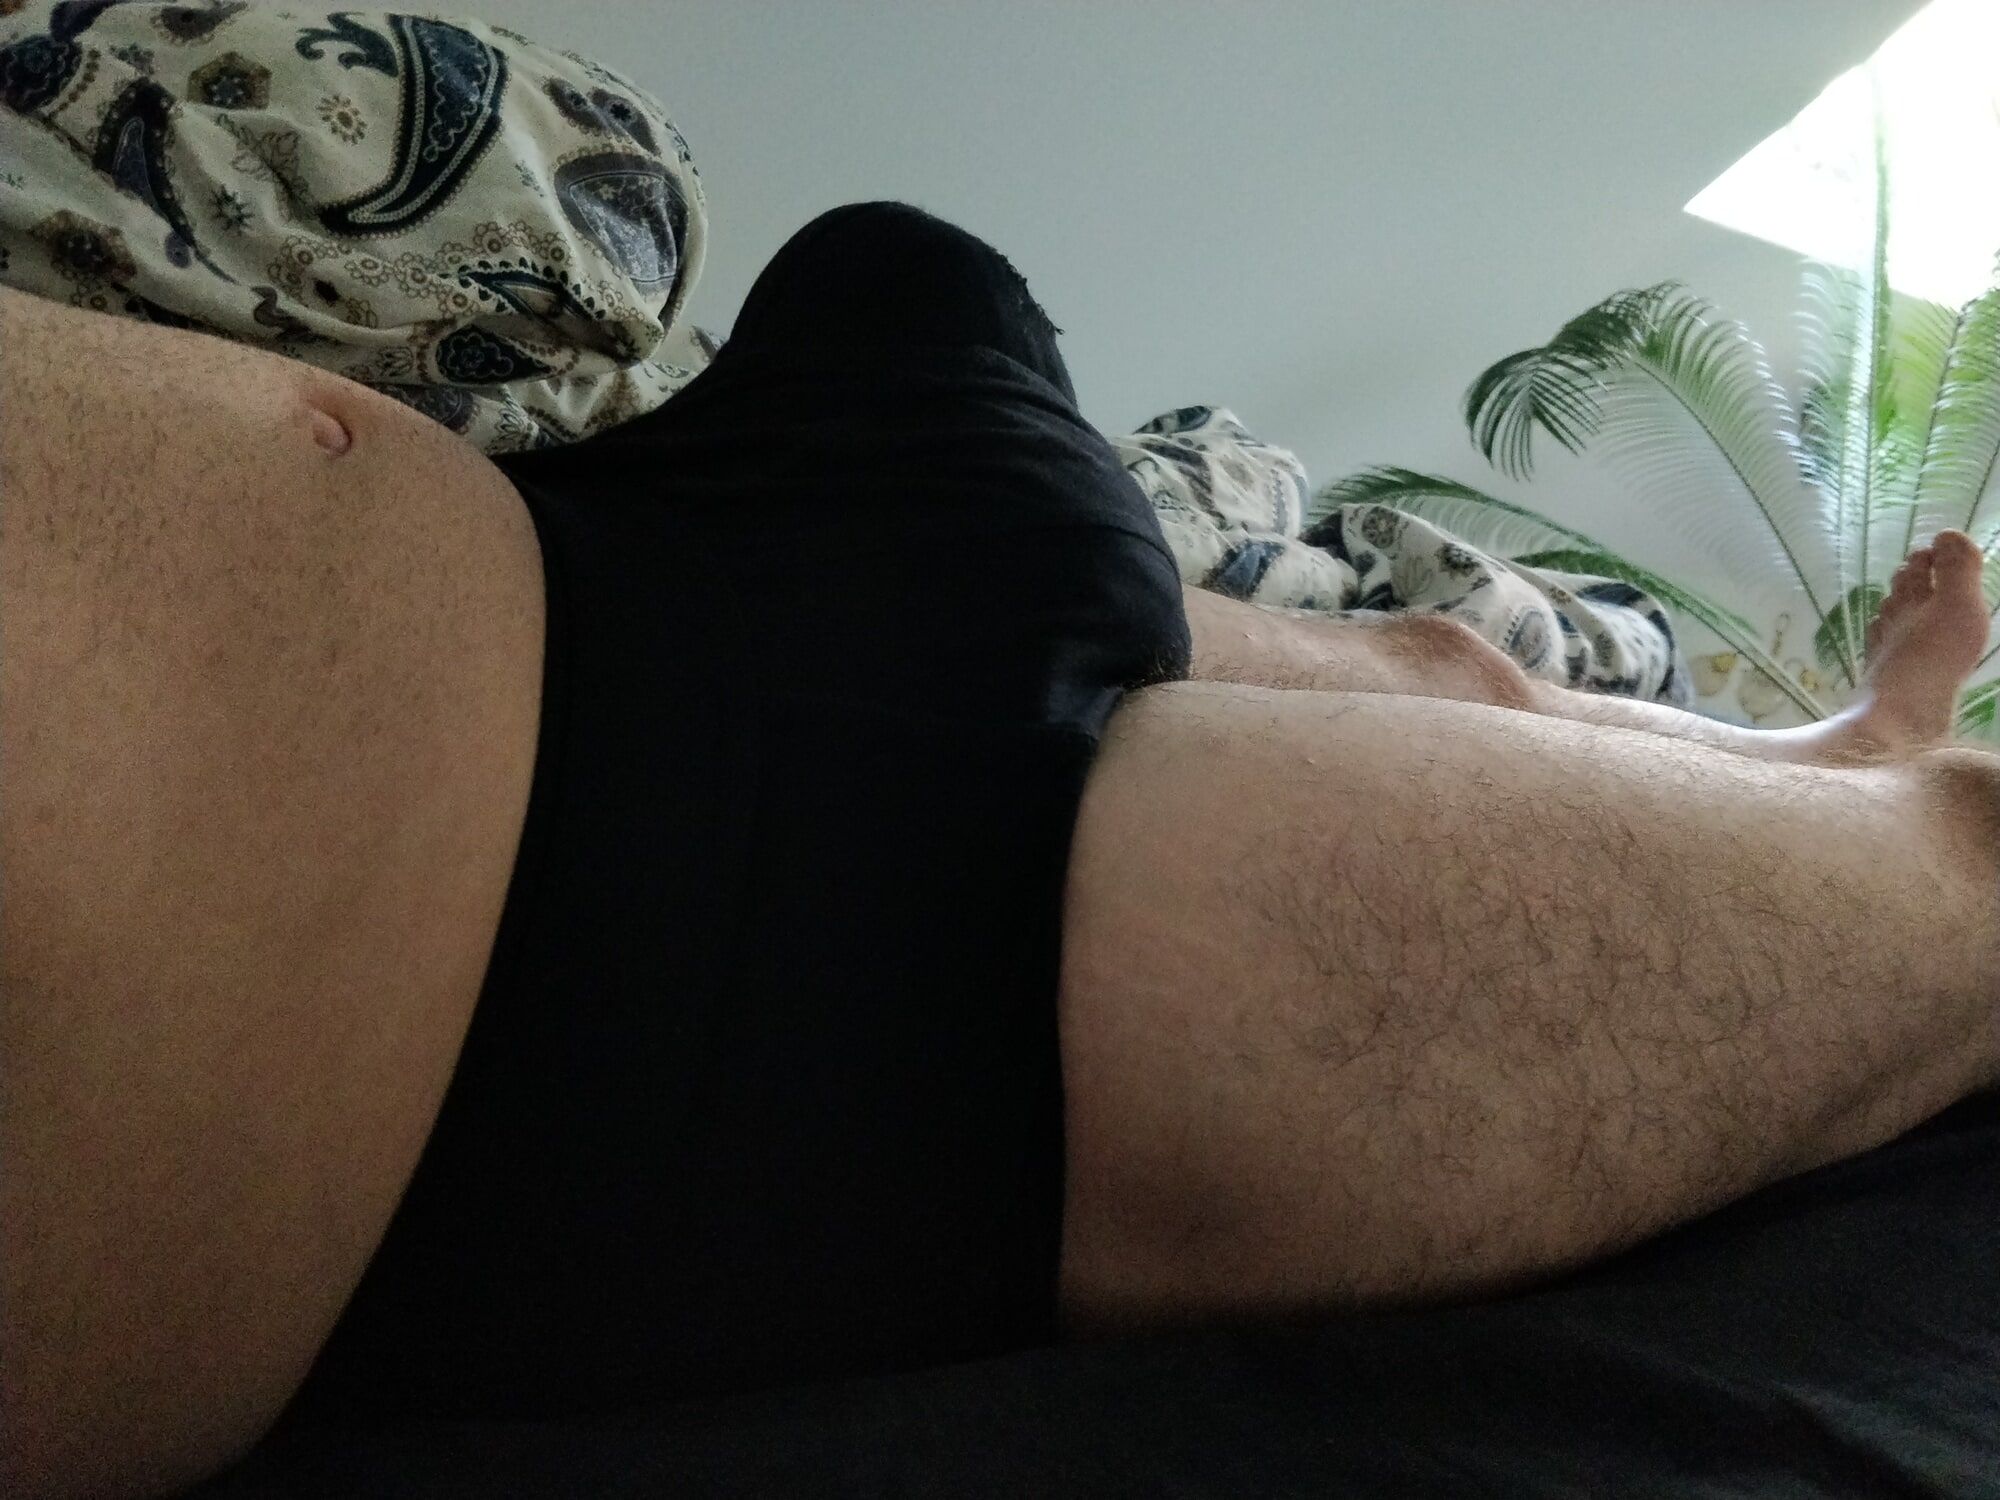 Waking up with a very hard, wet cock in my thick pad.